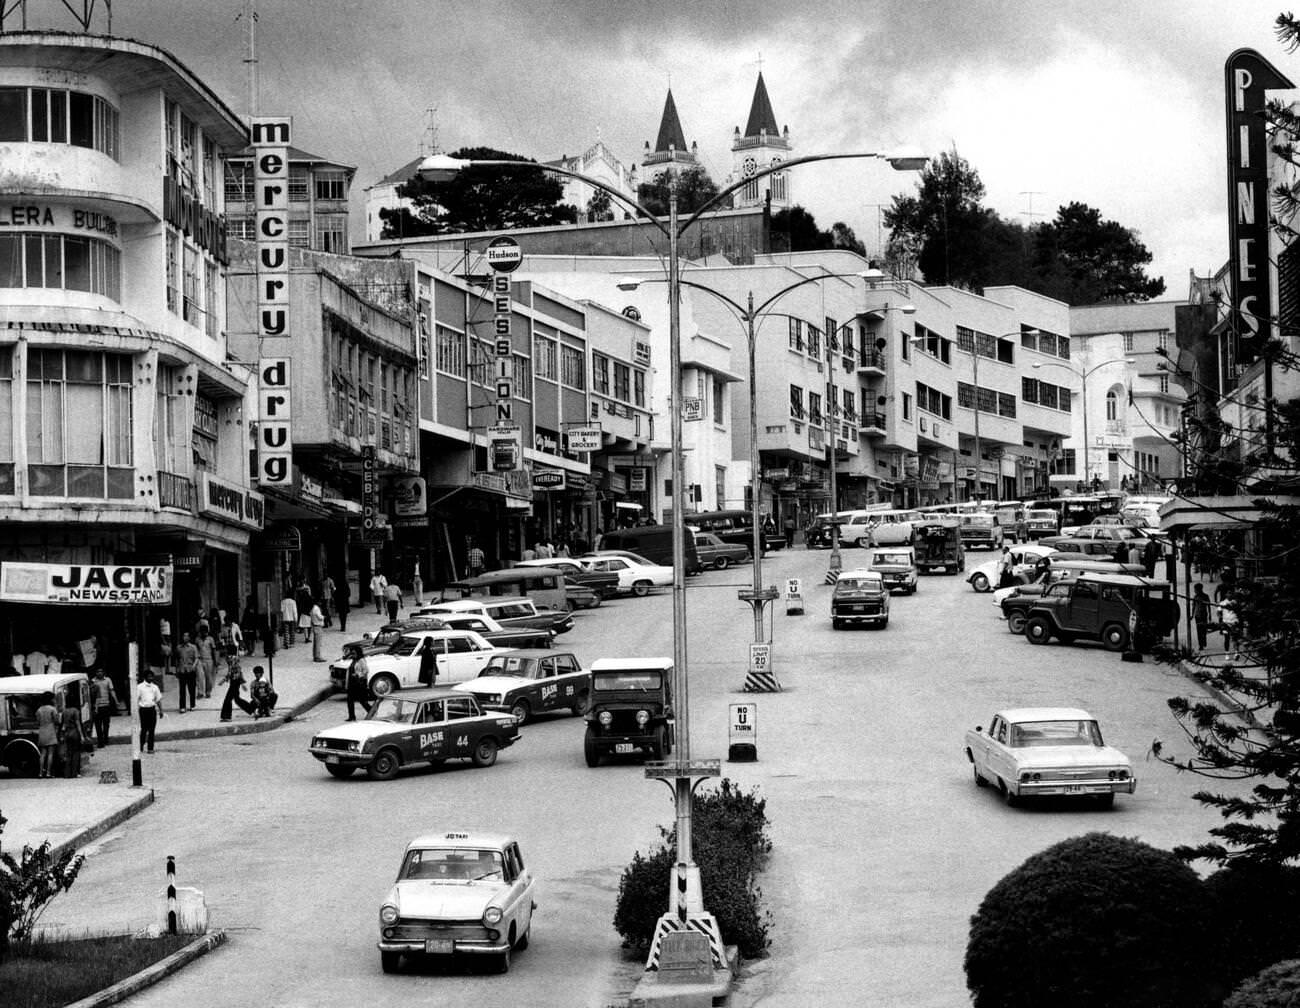 Session Road in Baguio City, Luzon, Philippines, 1972.